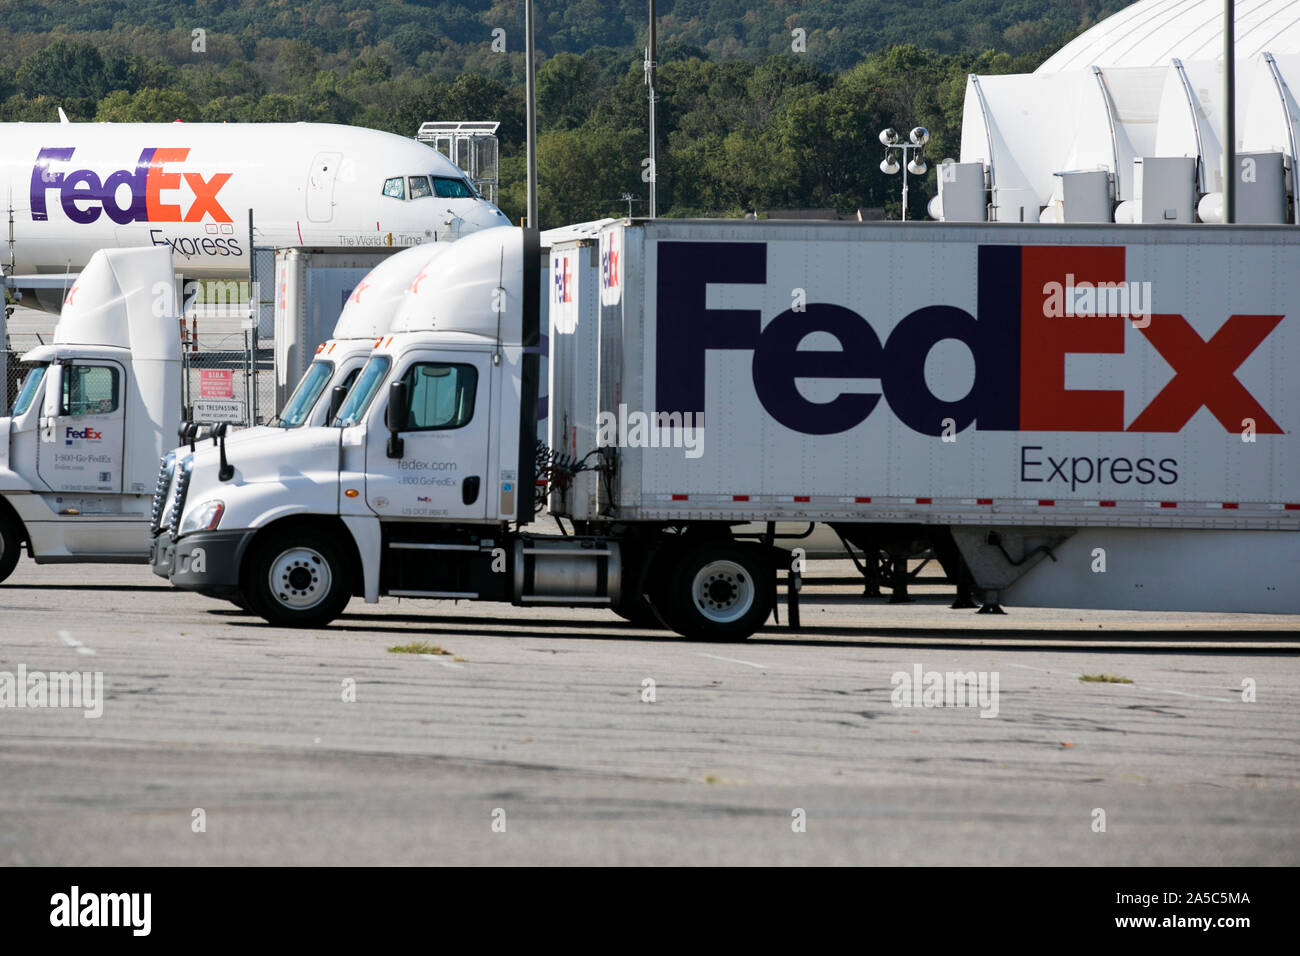 A FedEx Boeing 757 cargo plane and trucks at a FedEx cargo facility in Roanoke, Virginia on September 15, 2019. Stock Photo